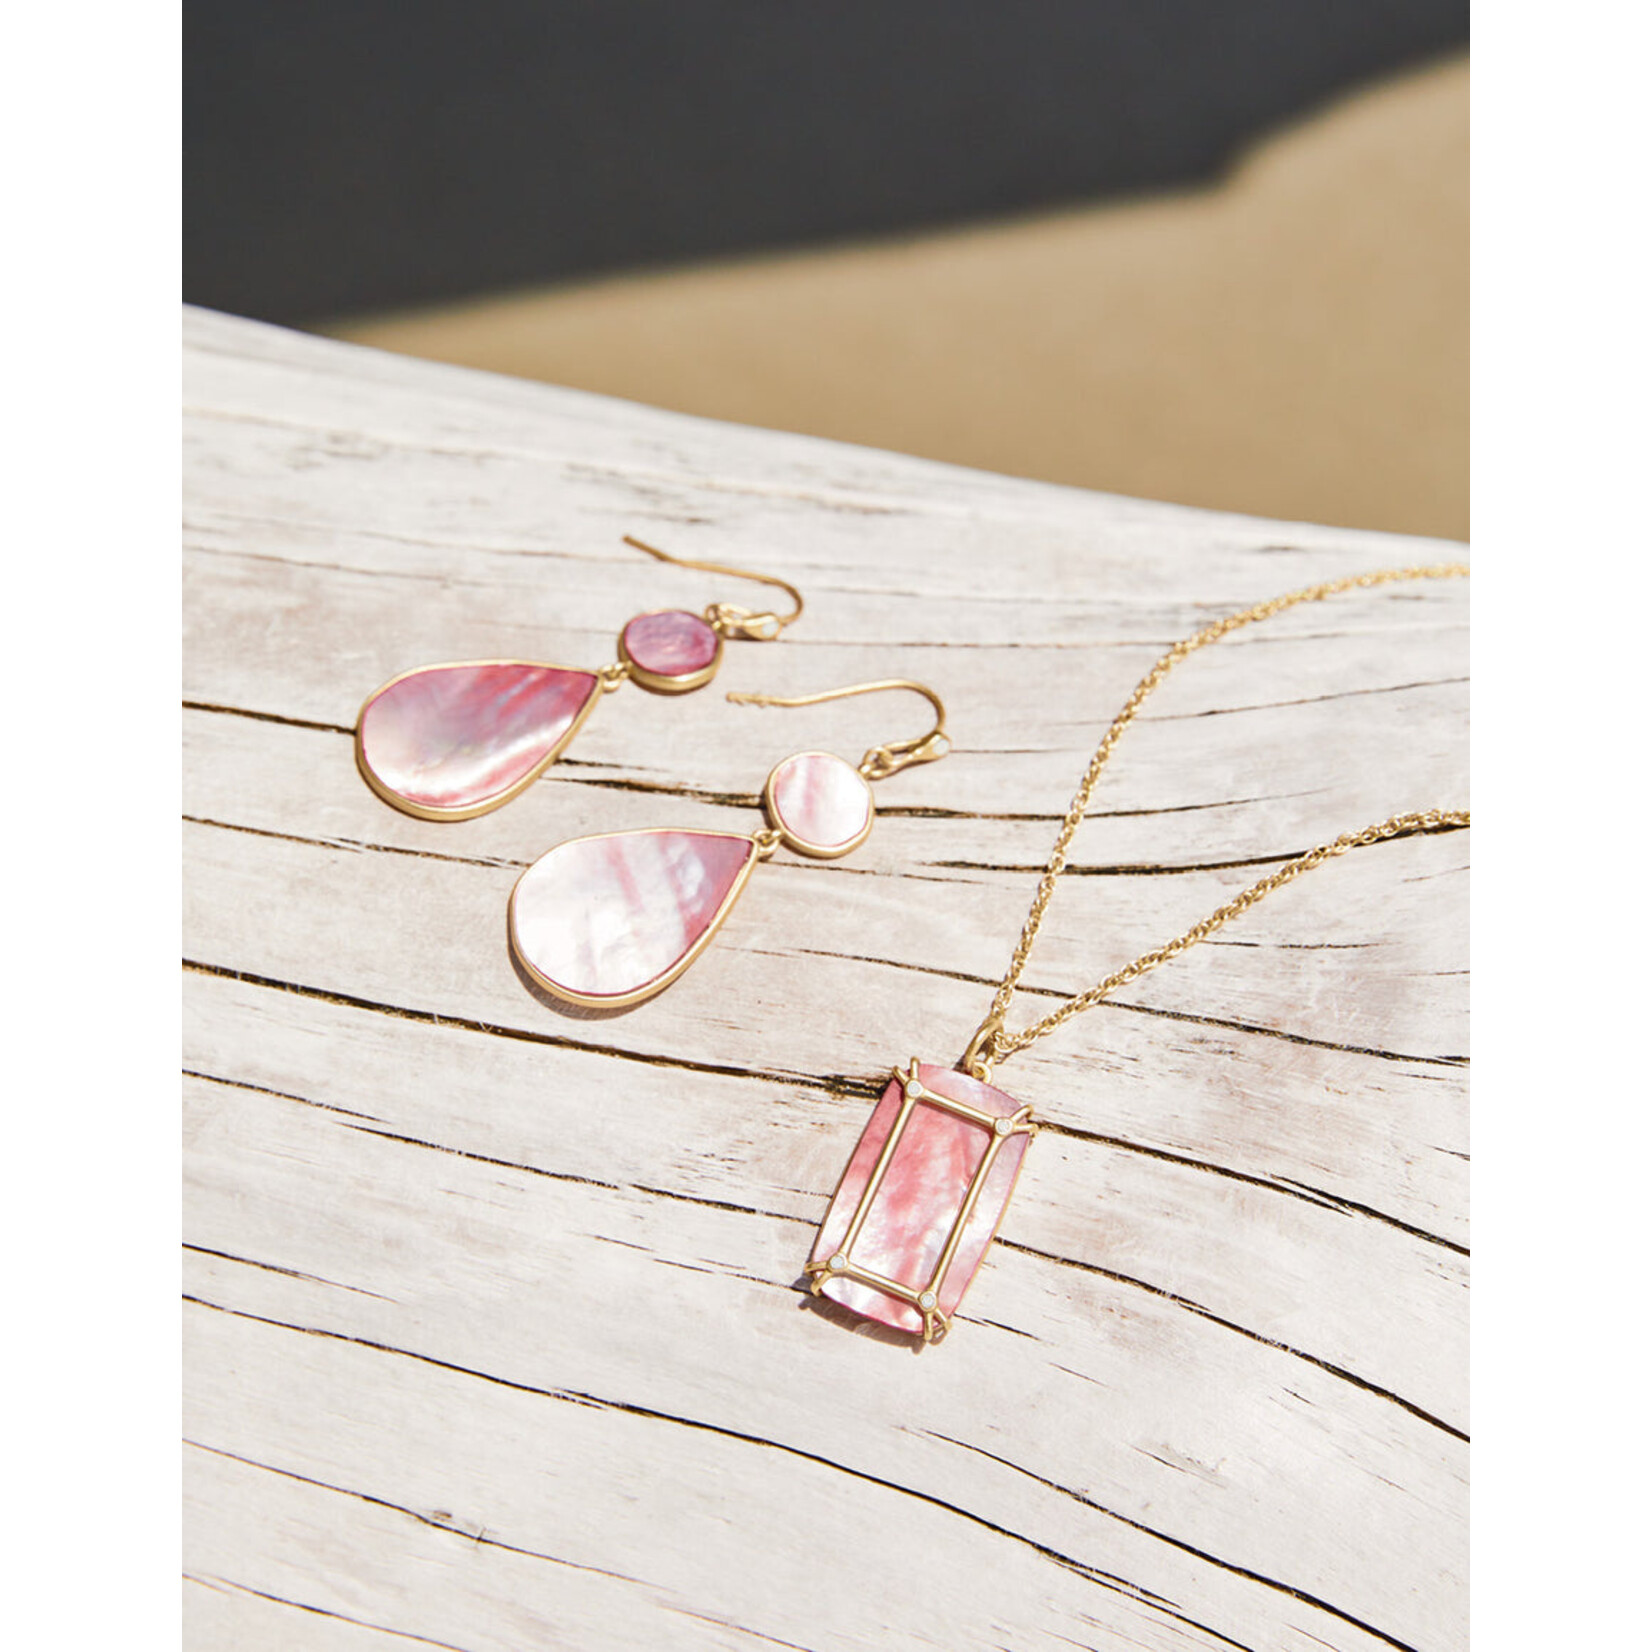 Spartina Batina Earrings Pink Mother-of-Pearl